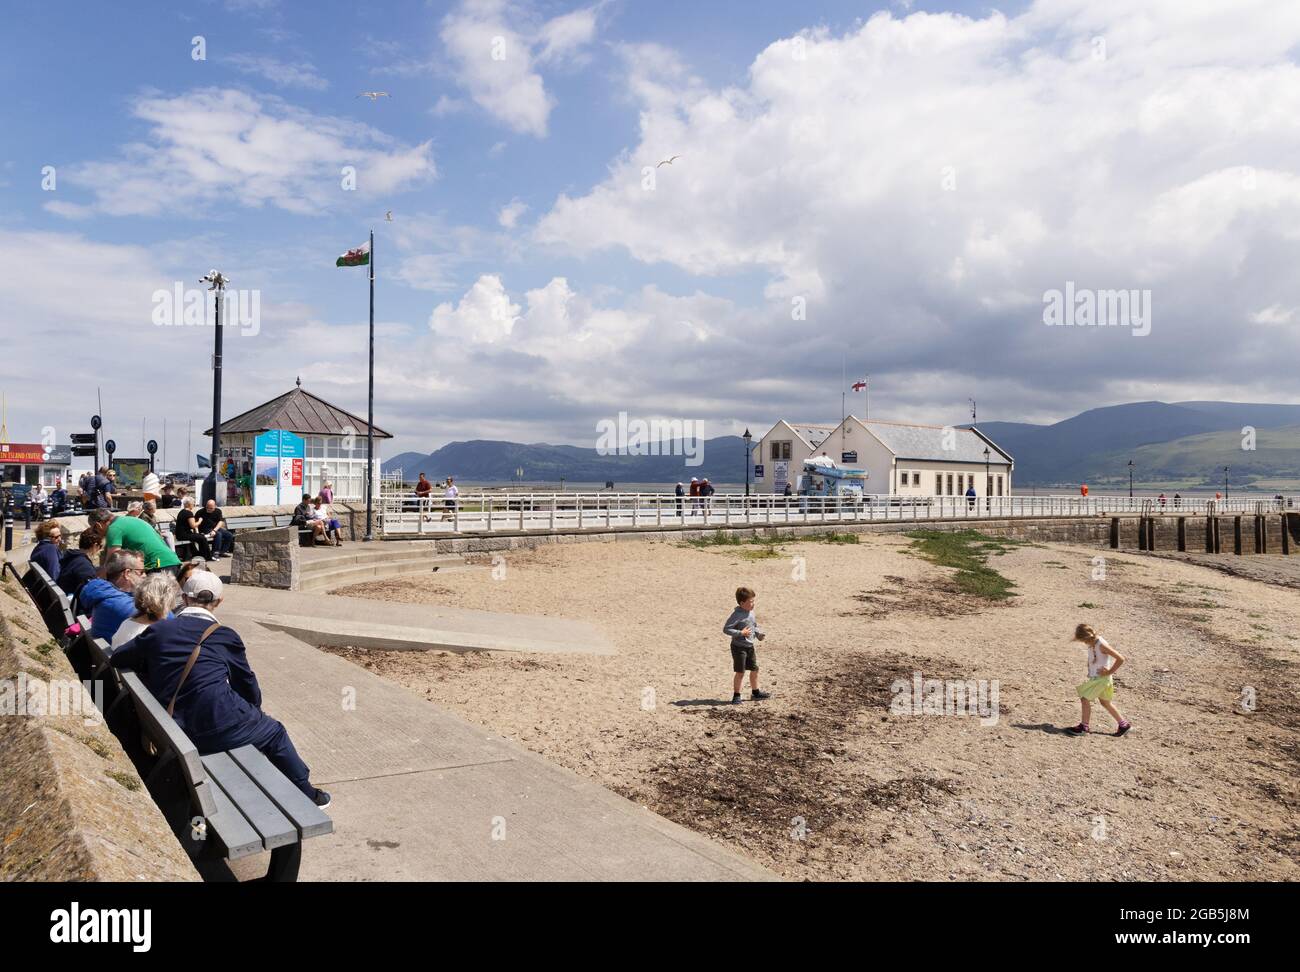 Staycation UK in summer; People on the beach, Beaumaris beach, Beaumaris seafront, Anglesey Wales Britain UK Stock Photo